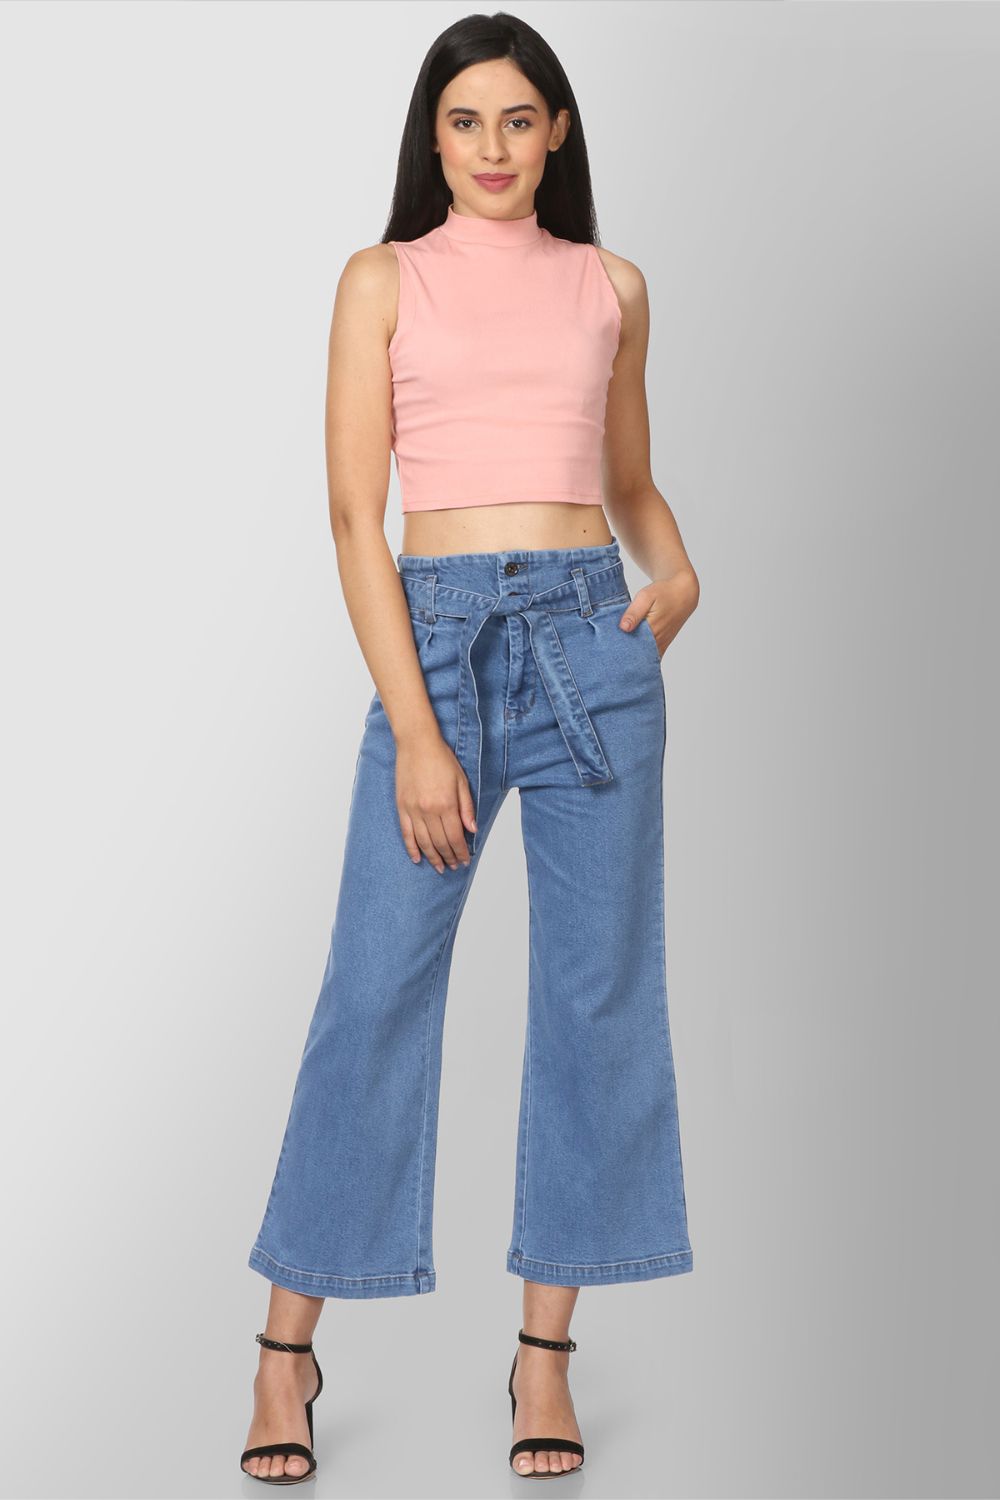 Buy parallel jeans pants for women in India @ Limeroad | page 2